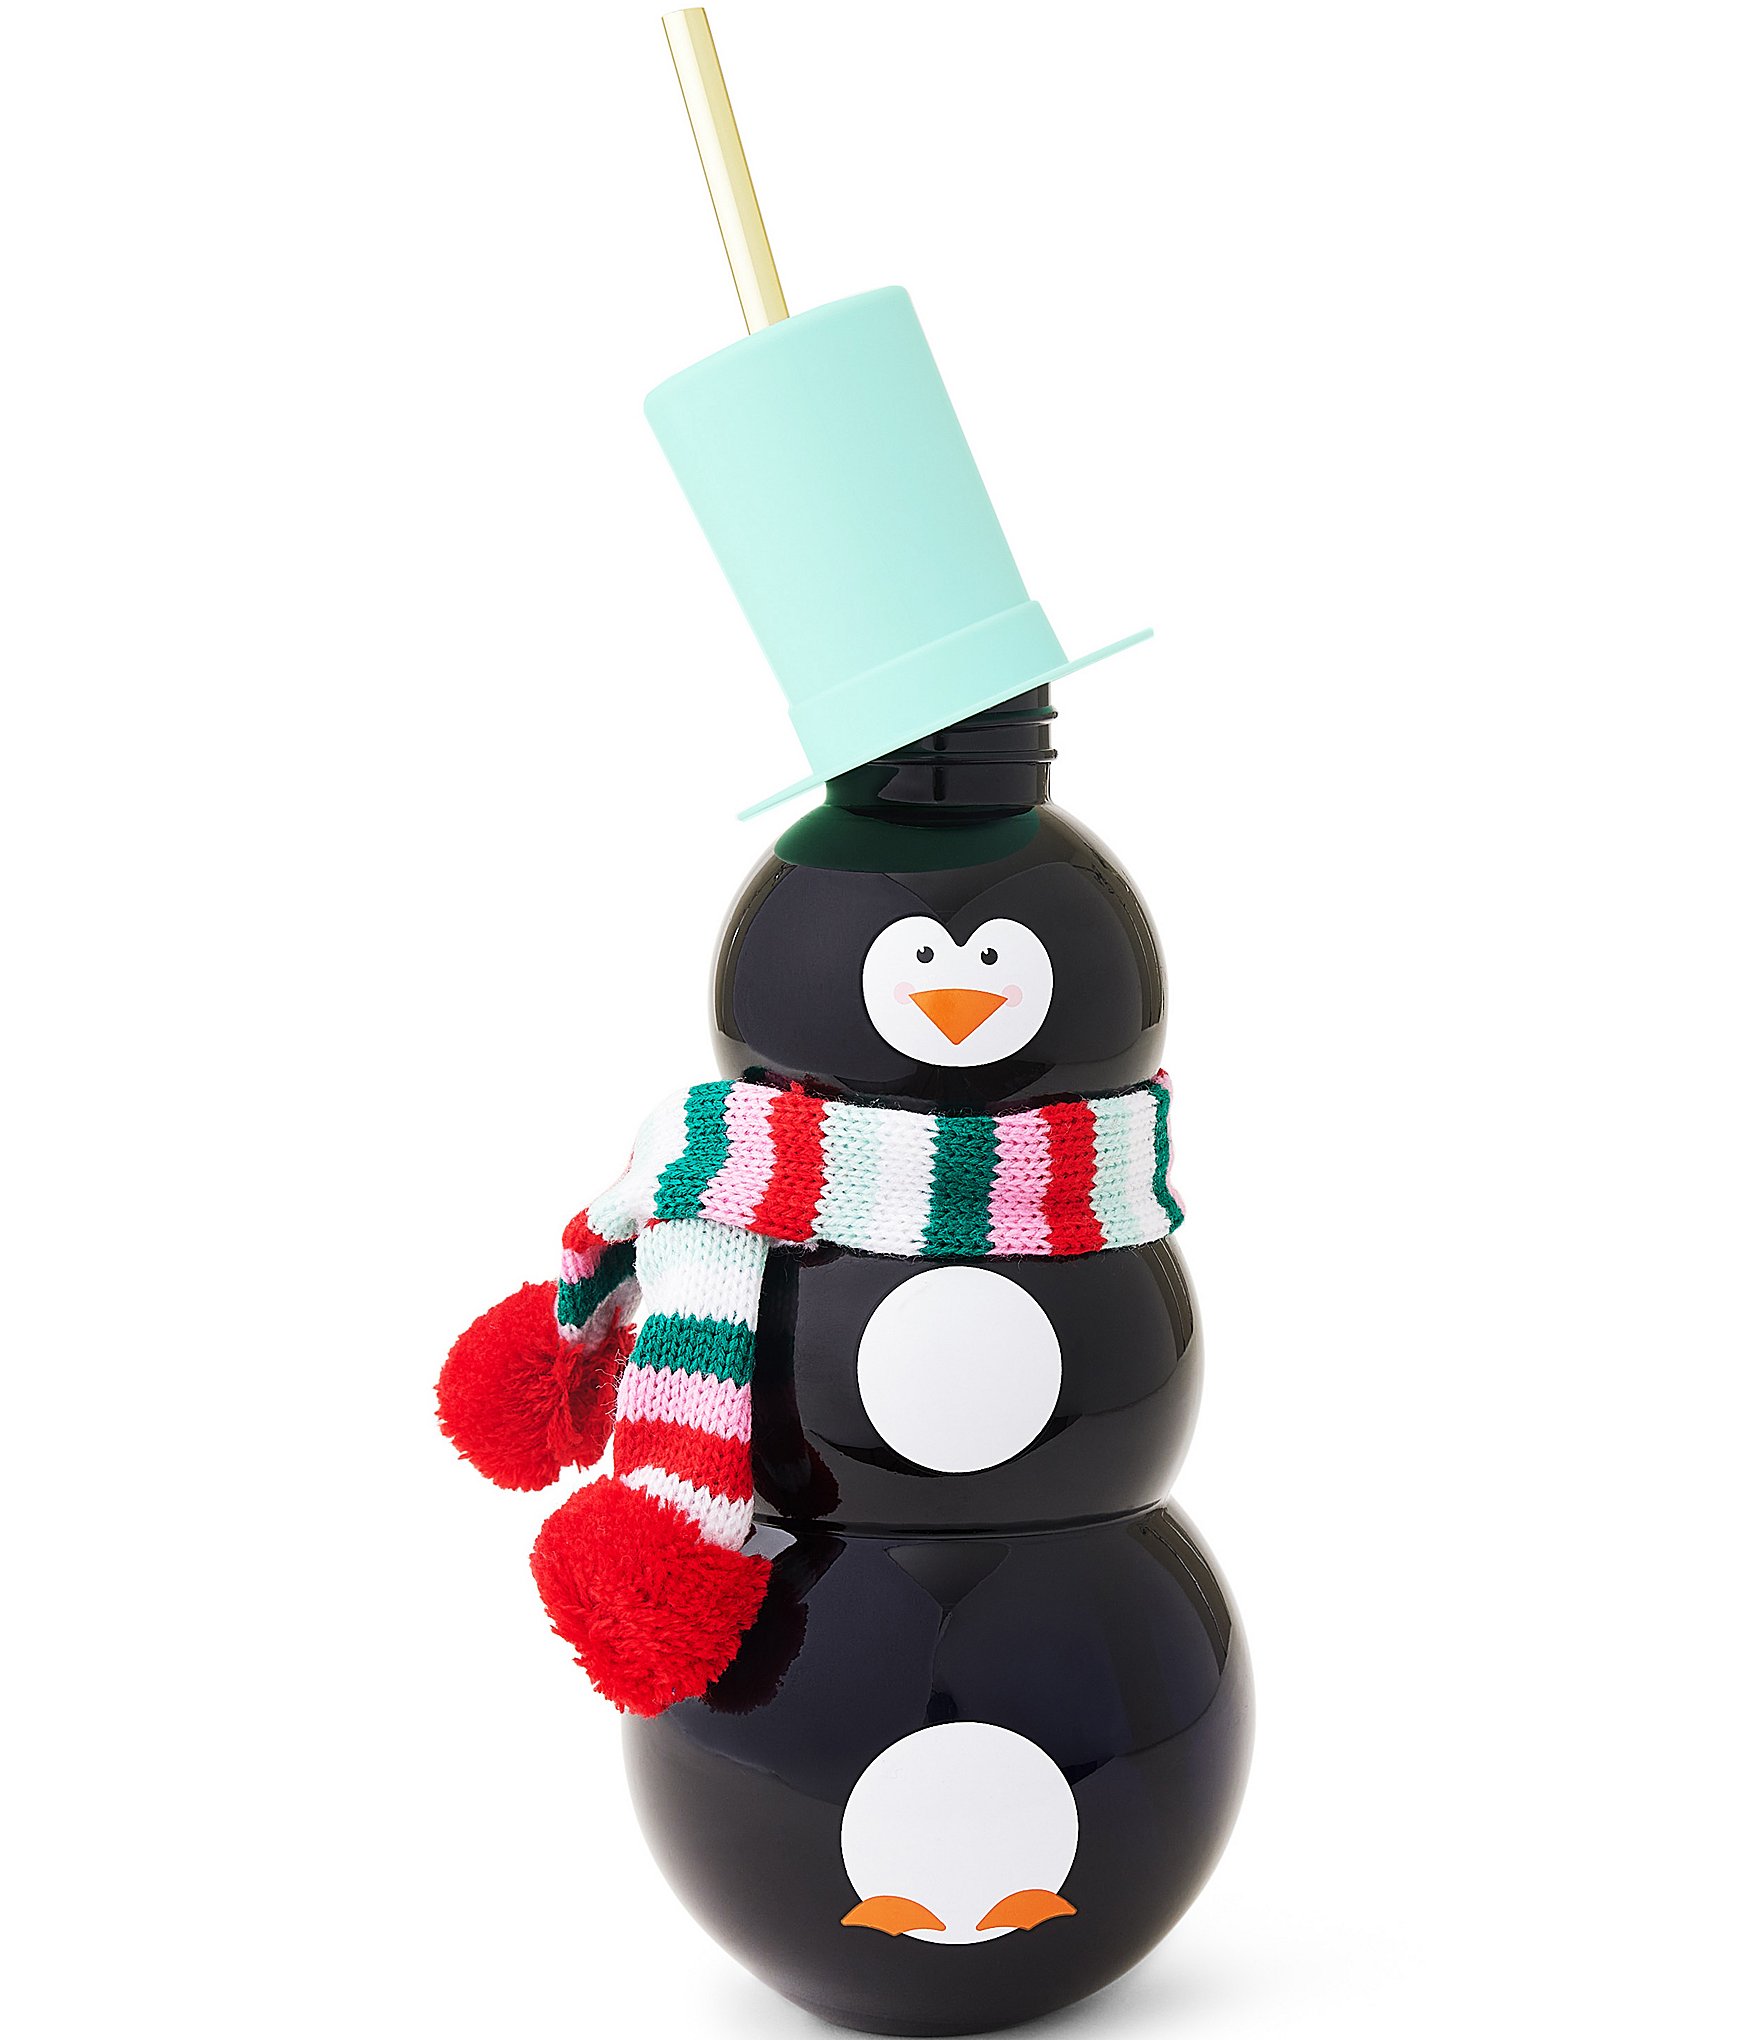 https://dimg.dillards.com/is/image/DillardsZoom/zoom/packed-party-penguin-novelty-sipper-cup/00000000_zi_ebfdcec1-80ff-496e-8ed5-5ed17d642565.jpg